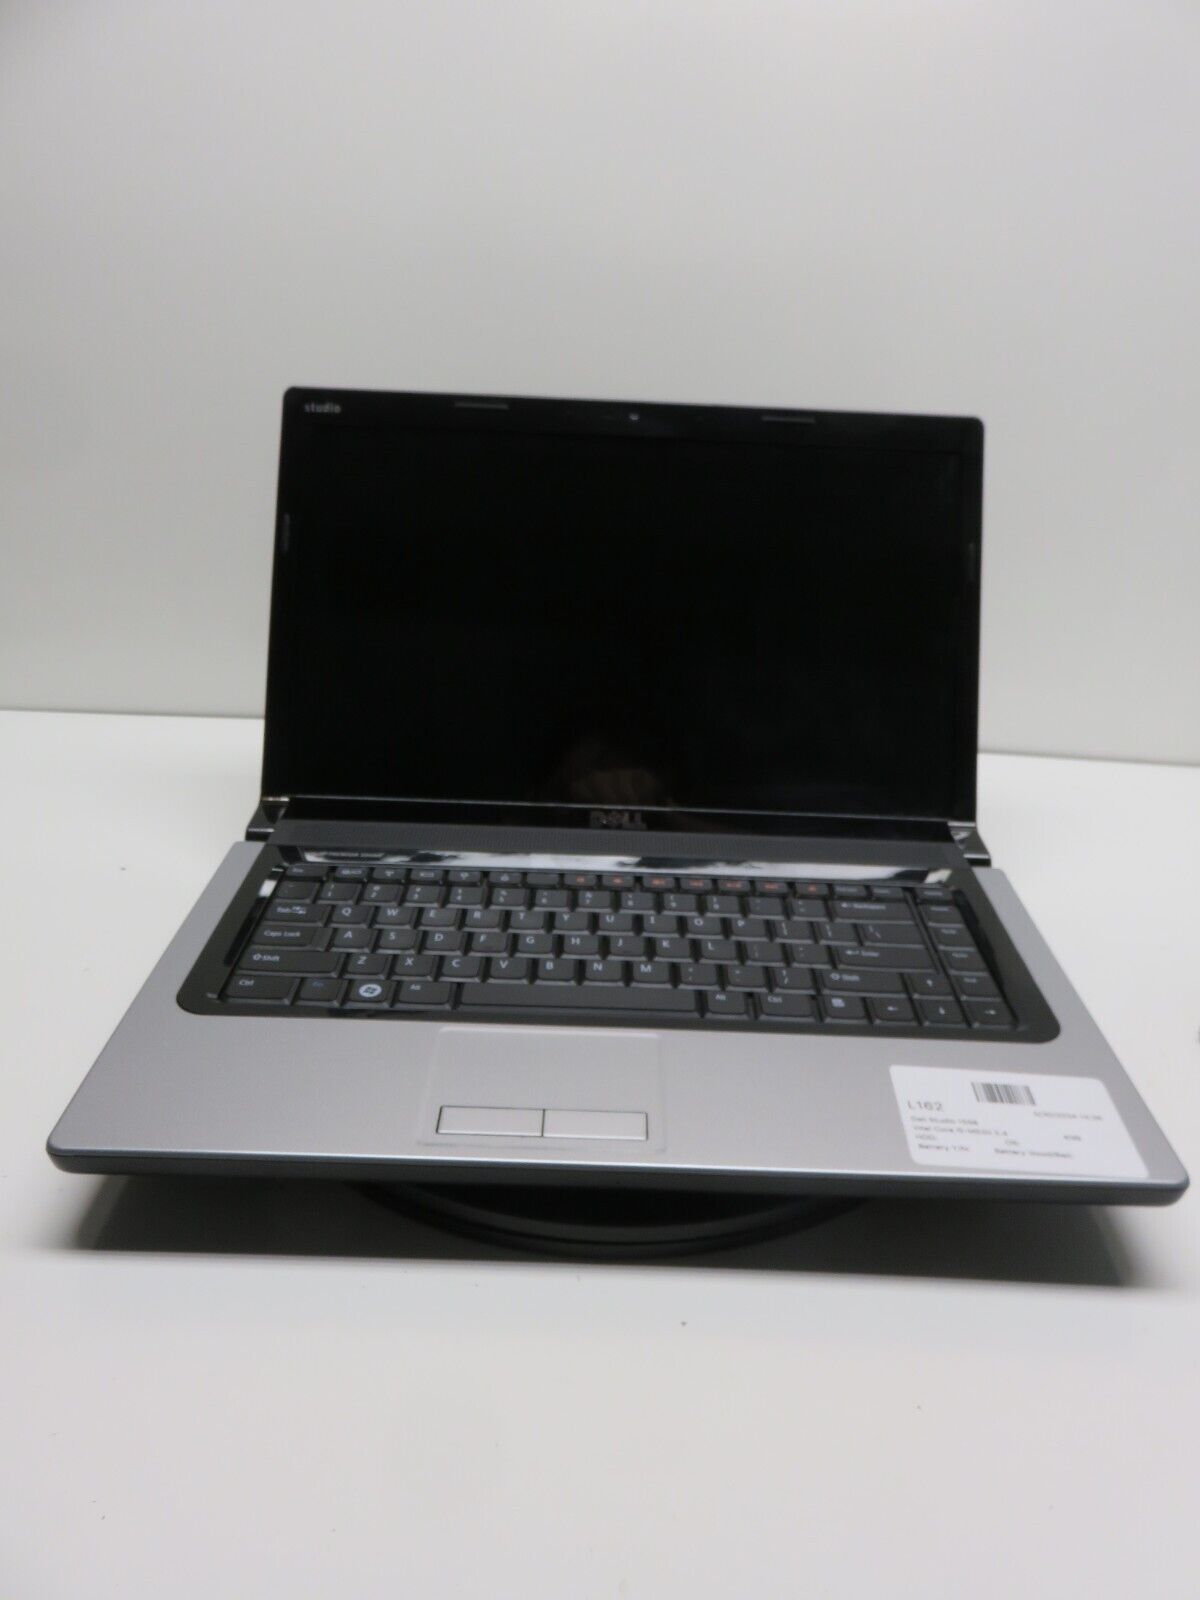 Dell Studio 1558 Laptop Intel Core i5-M520 4GB Ram No HDD or Battery